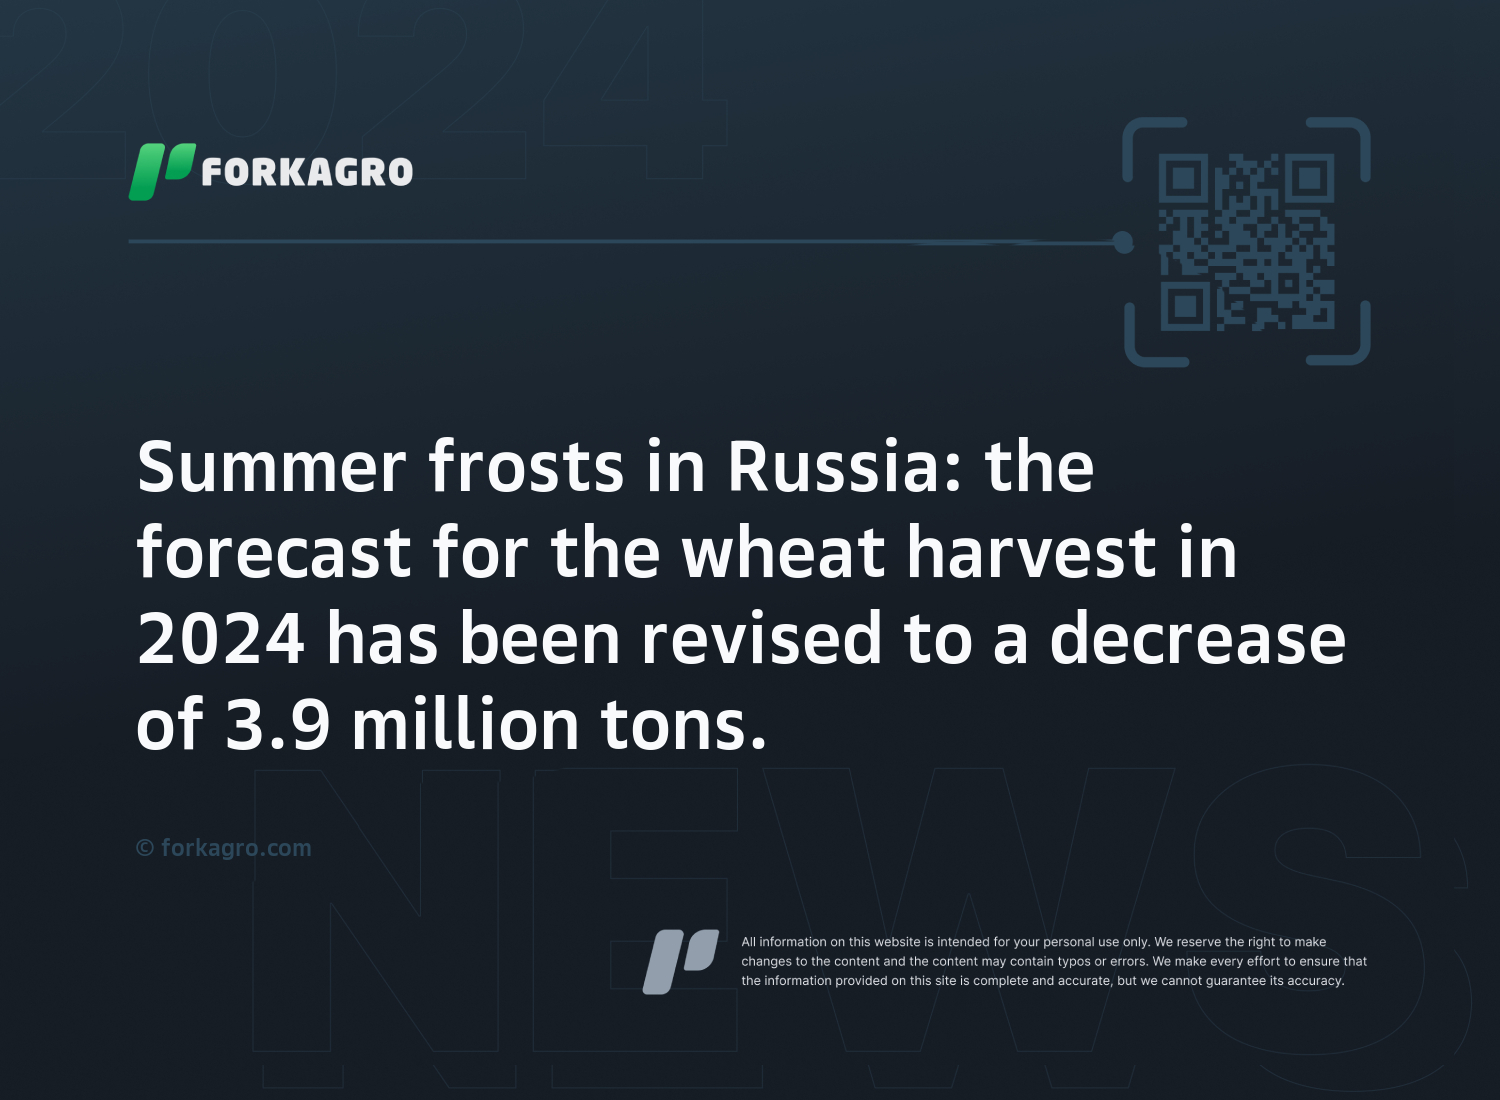 Summer frosts in Russia: the forecast for the wheat harvest in 2024 has been revised to a decrease of 3.9 million tons.